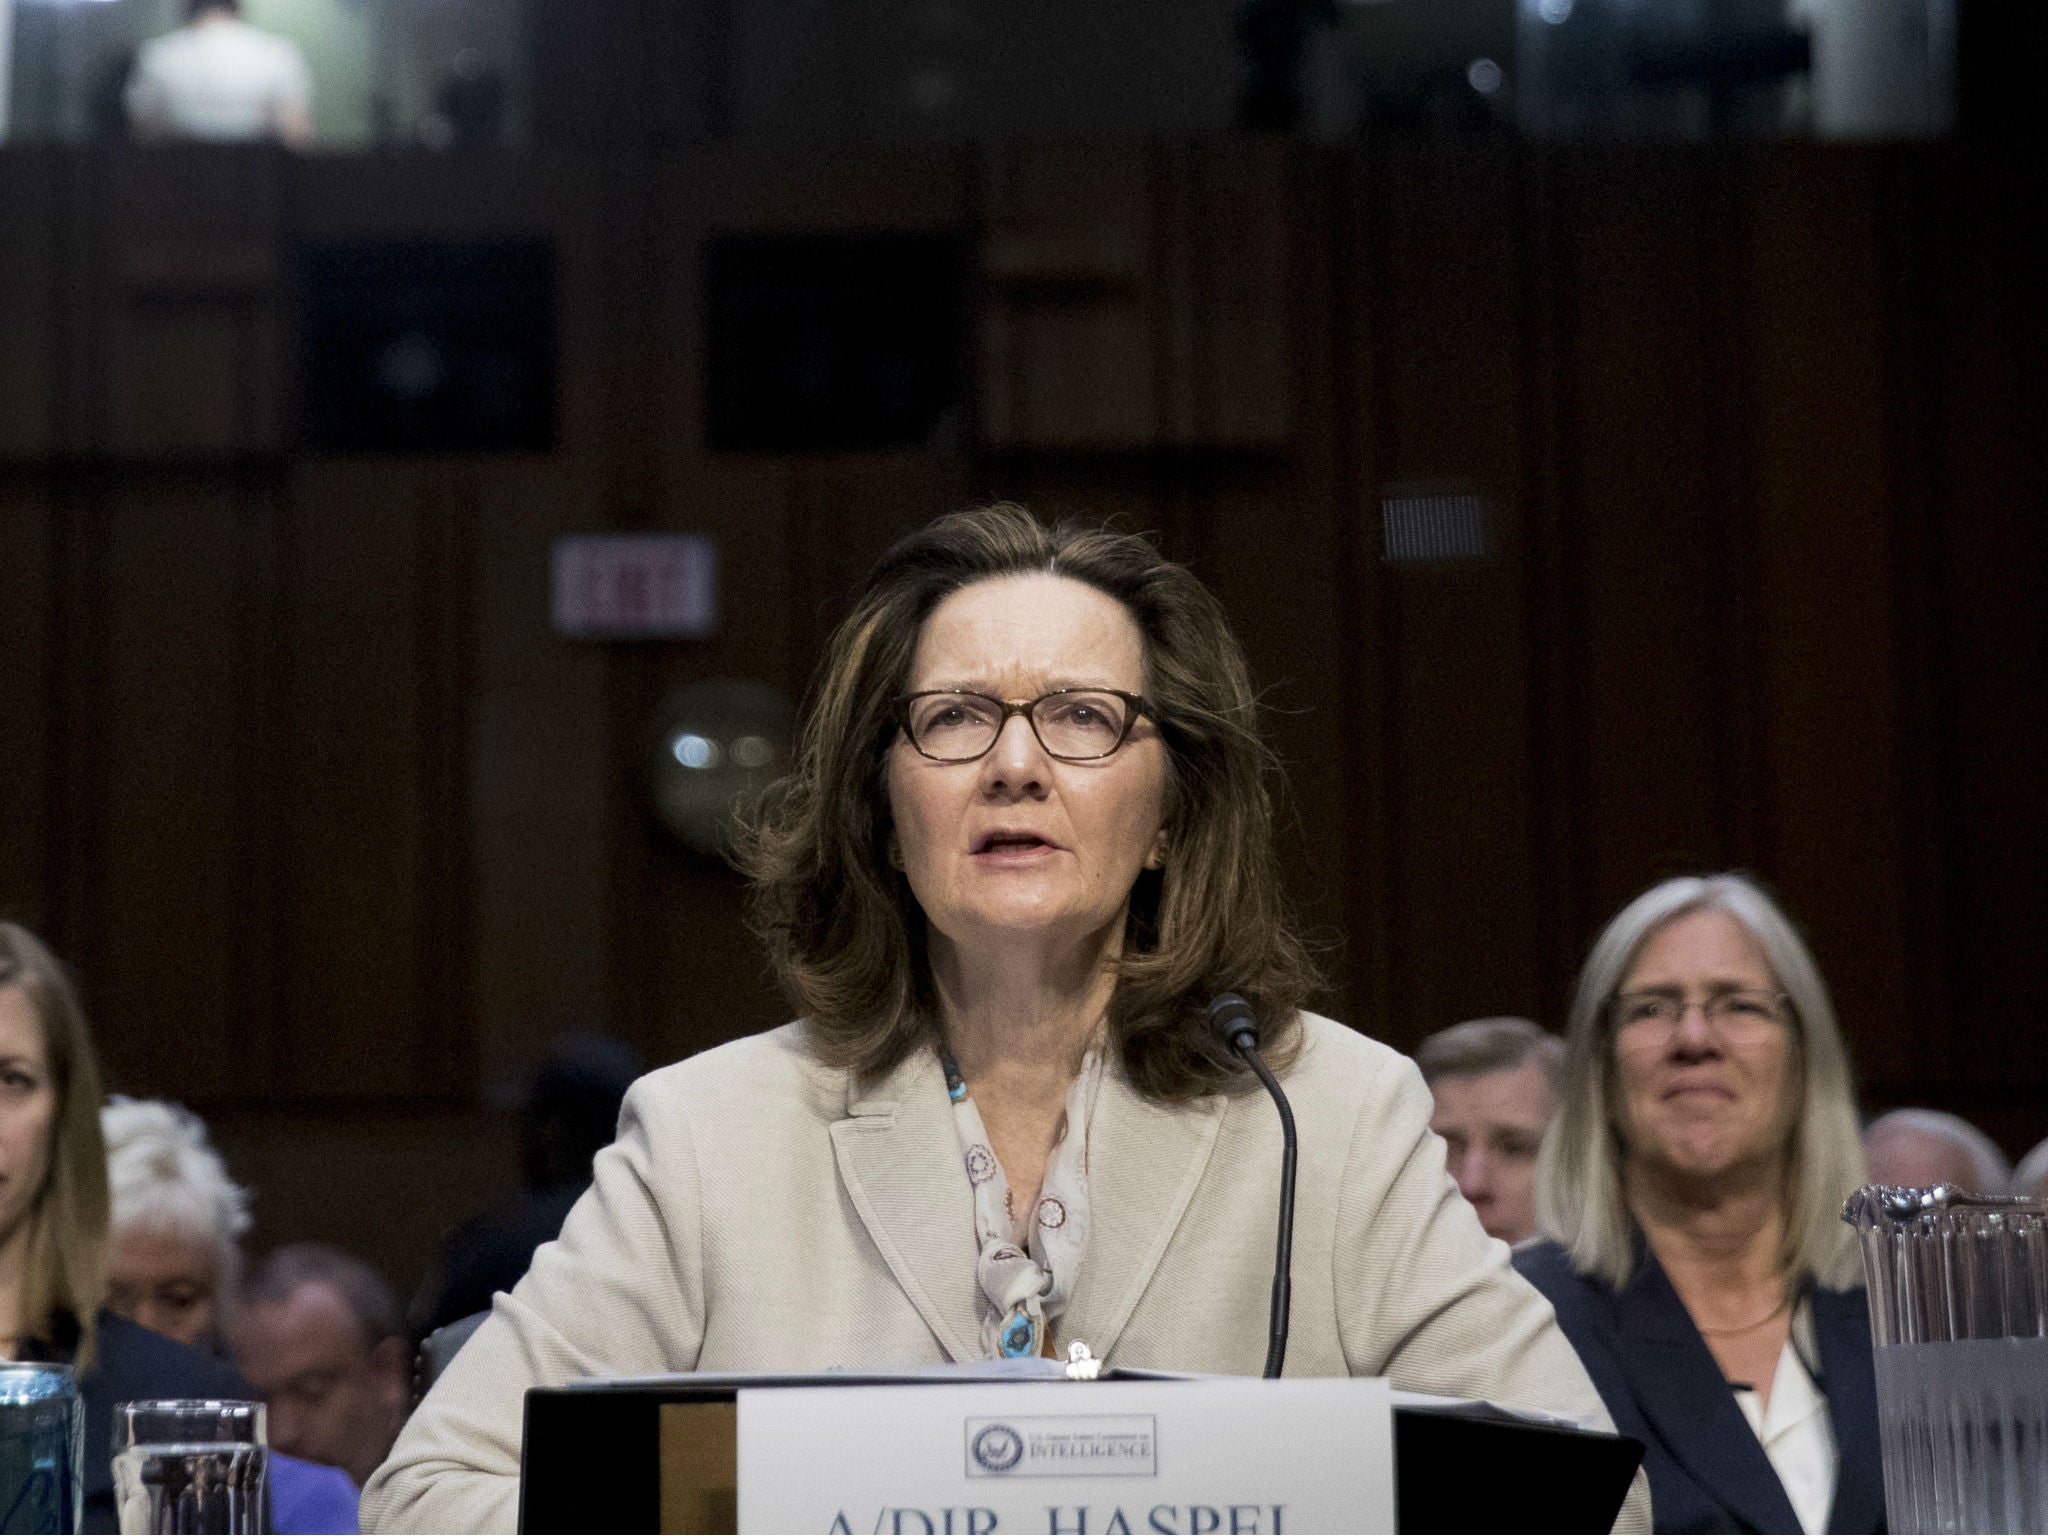 Gina Haspel, President Donald Trump's pick to lead the Central Intelligence Agency (CIA), testifies at her confirmation hearing